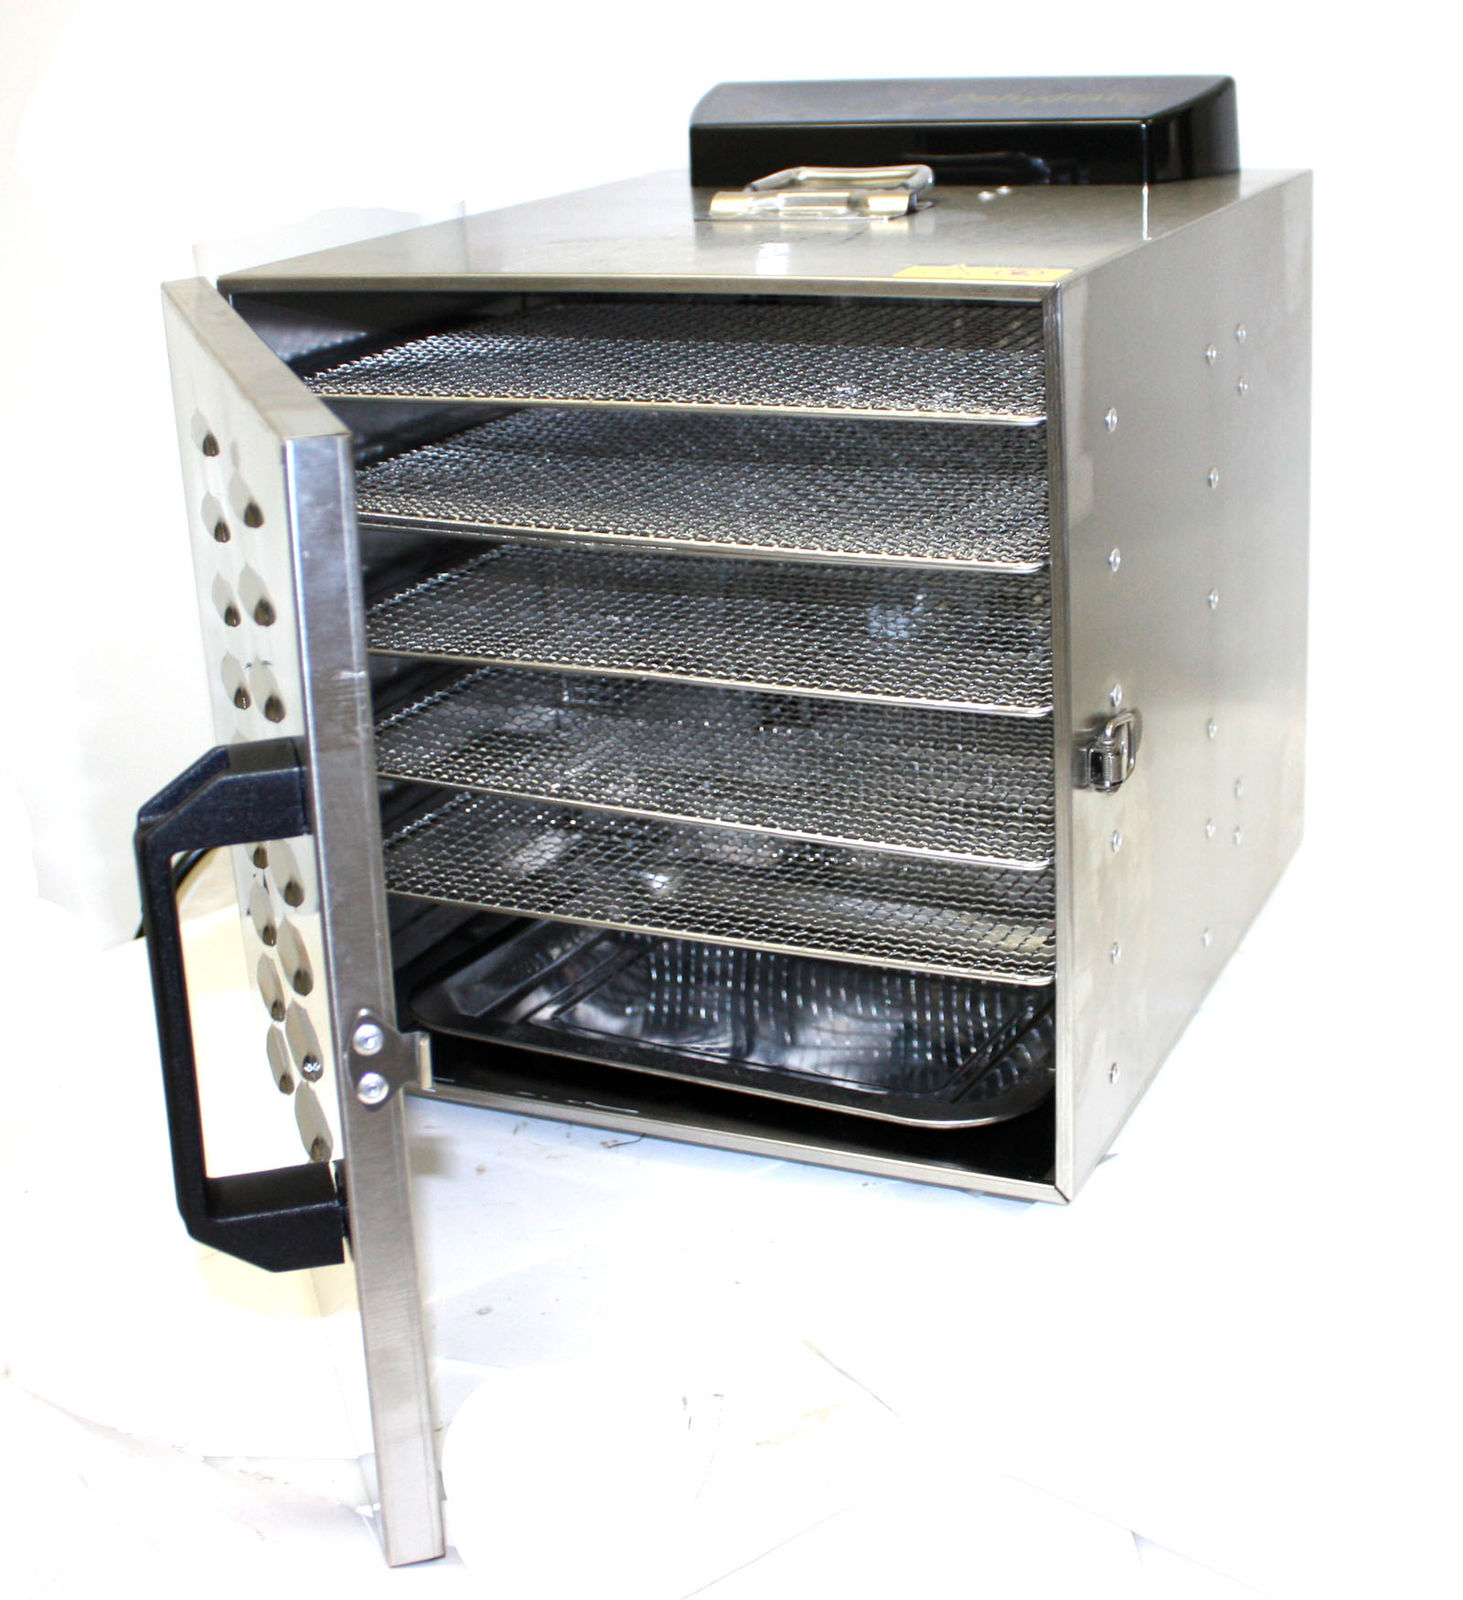 https://econosuperstore.com/wp-content/uploads/imported/5/Food-Dehydrator-Fruit-Vegetable-Meat-Drying-Machine-Snack-Dryer-6-Trays-Stainles-352267835075.JPG